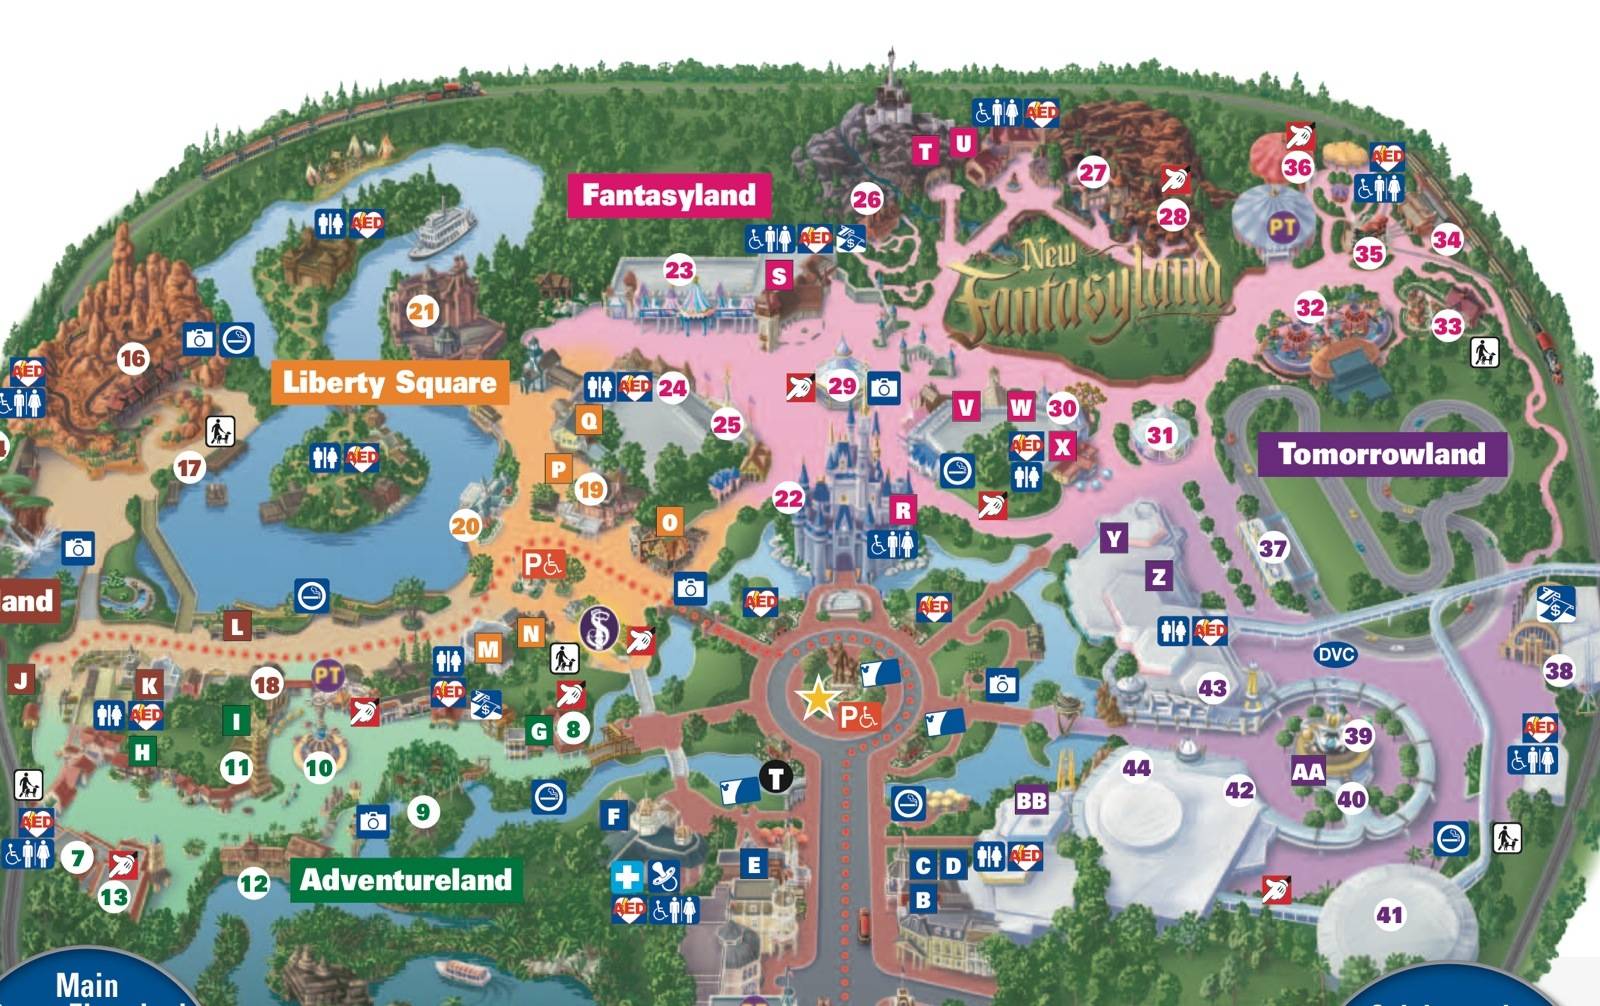 PHOTOS - New Fantasyland shown on the new Magic Kingdom guide maps